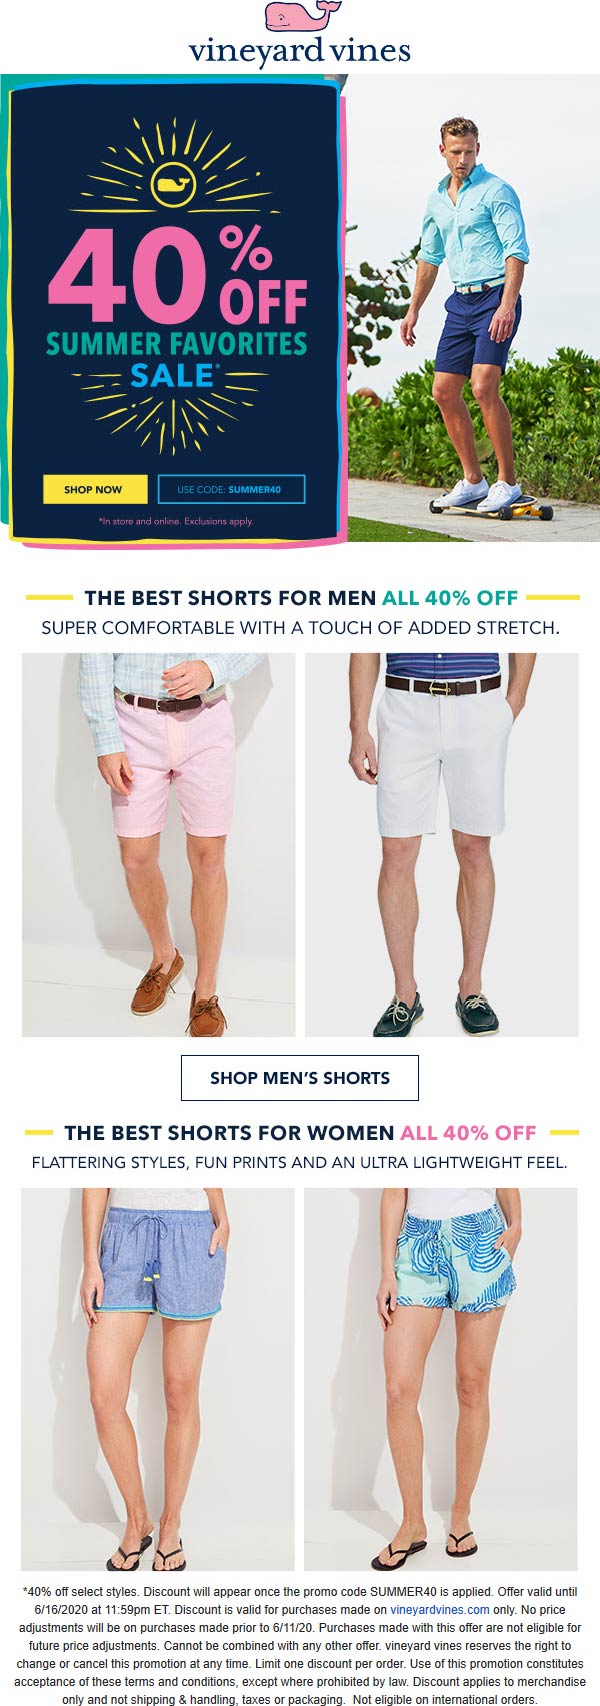 Vineyard Vines stores Coupon  40% off summer at Vineyard Vines via promo code SUMMER40 #vineyardvines